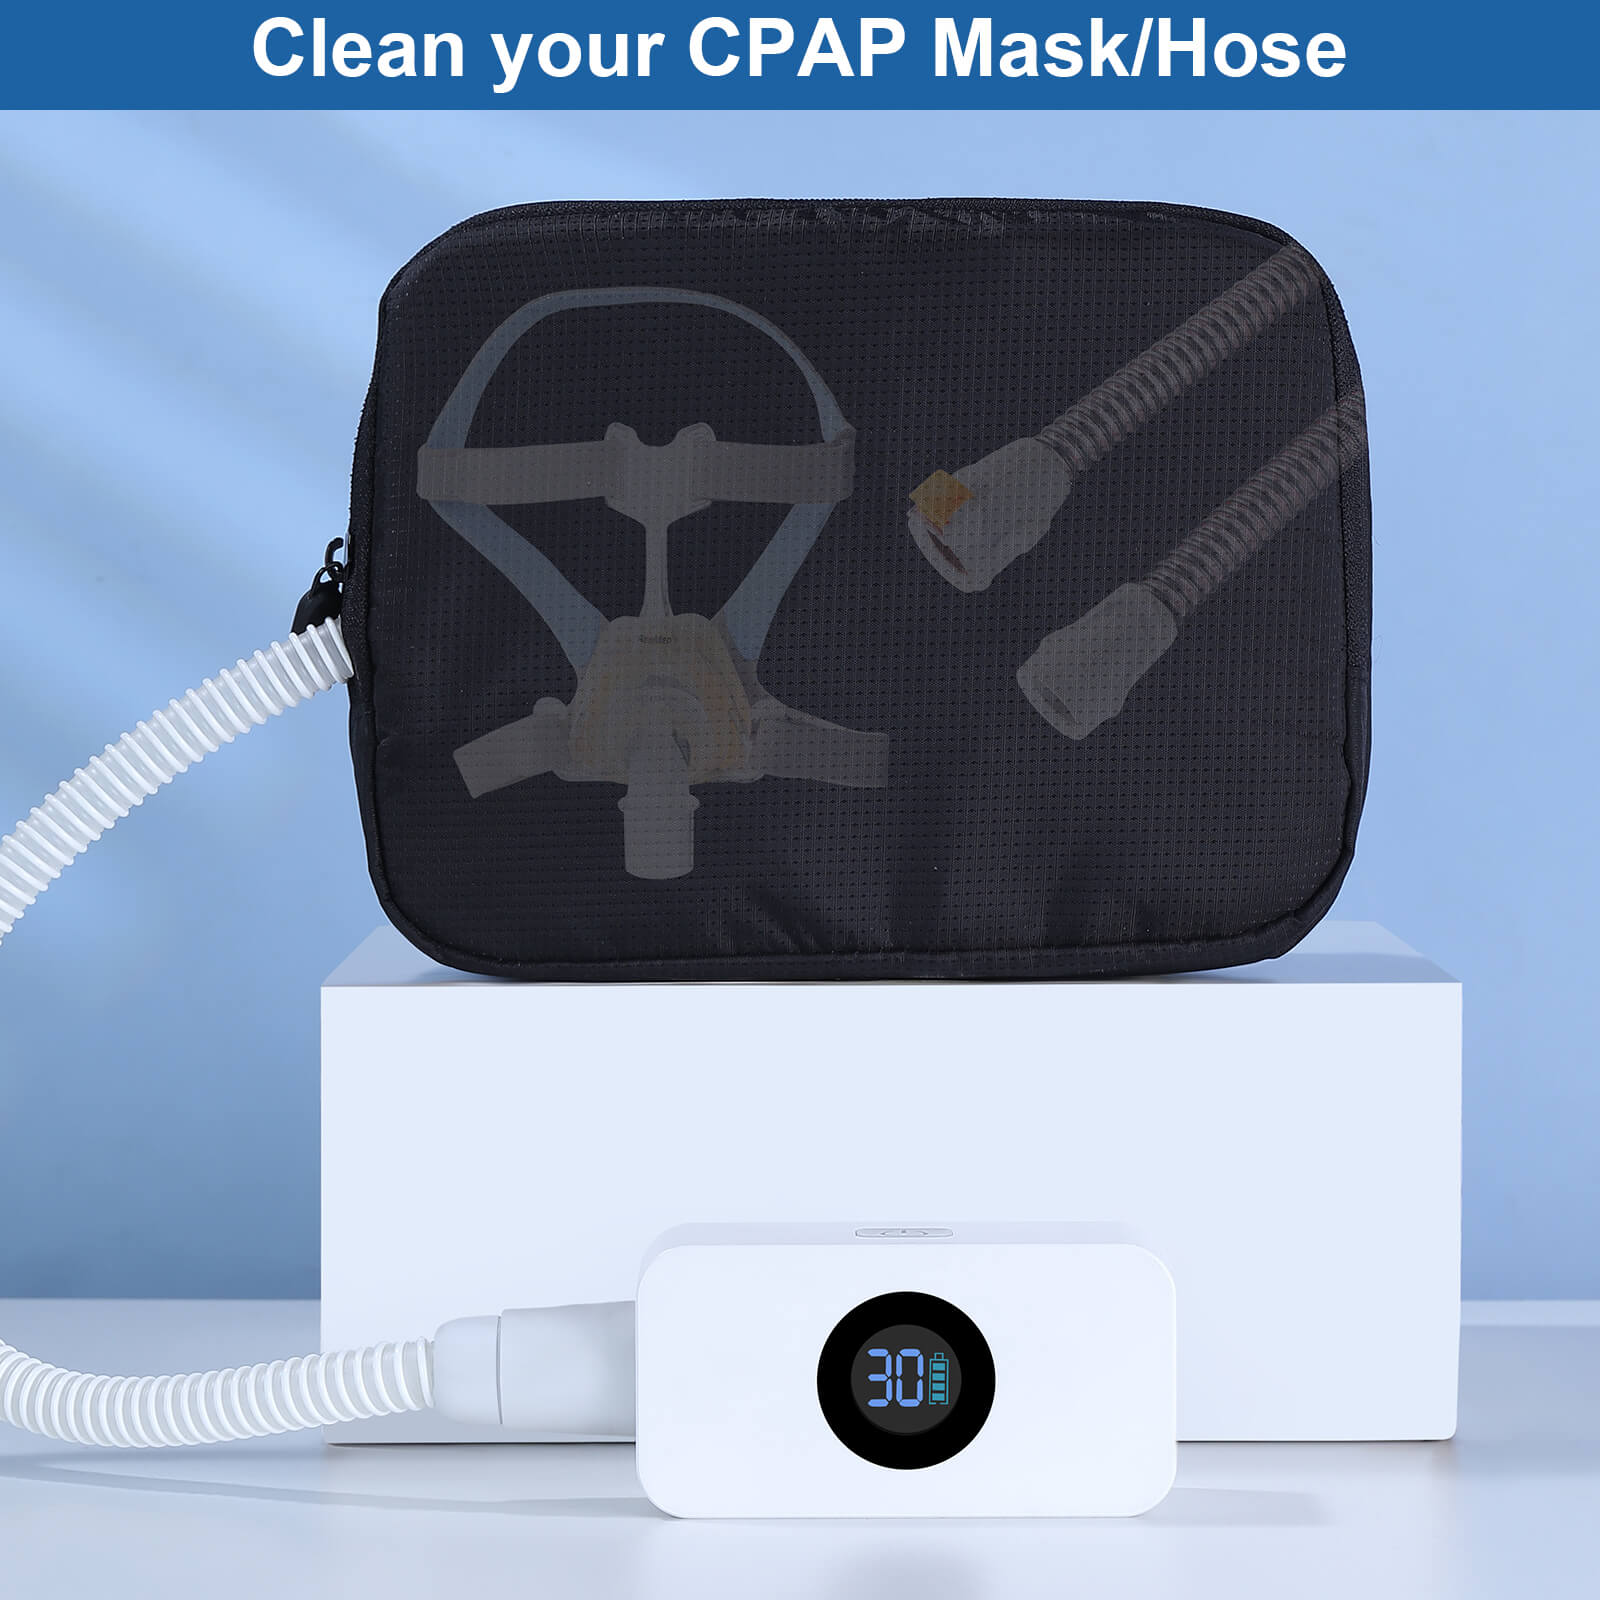 clyn clean your cpap mask and hose